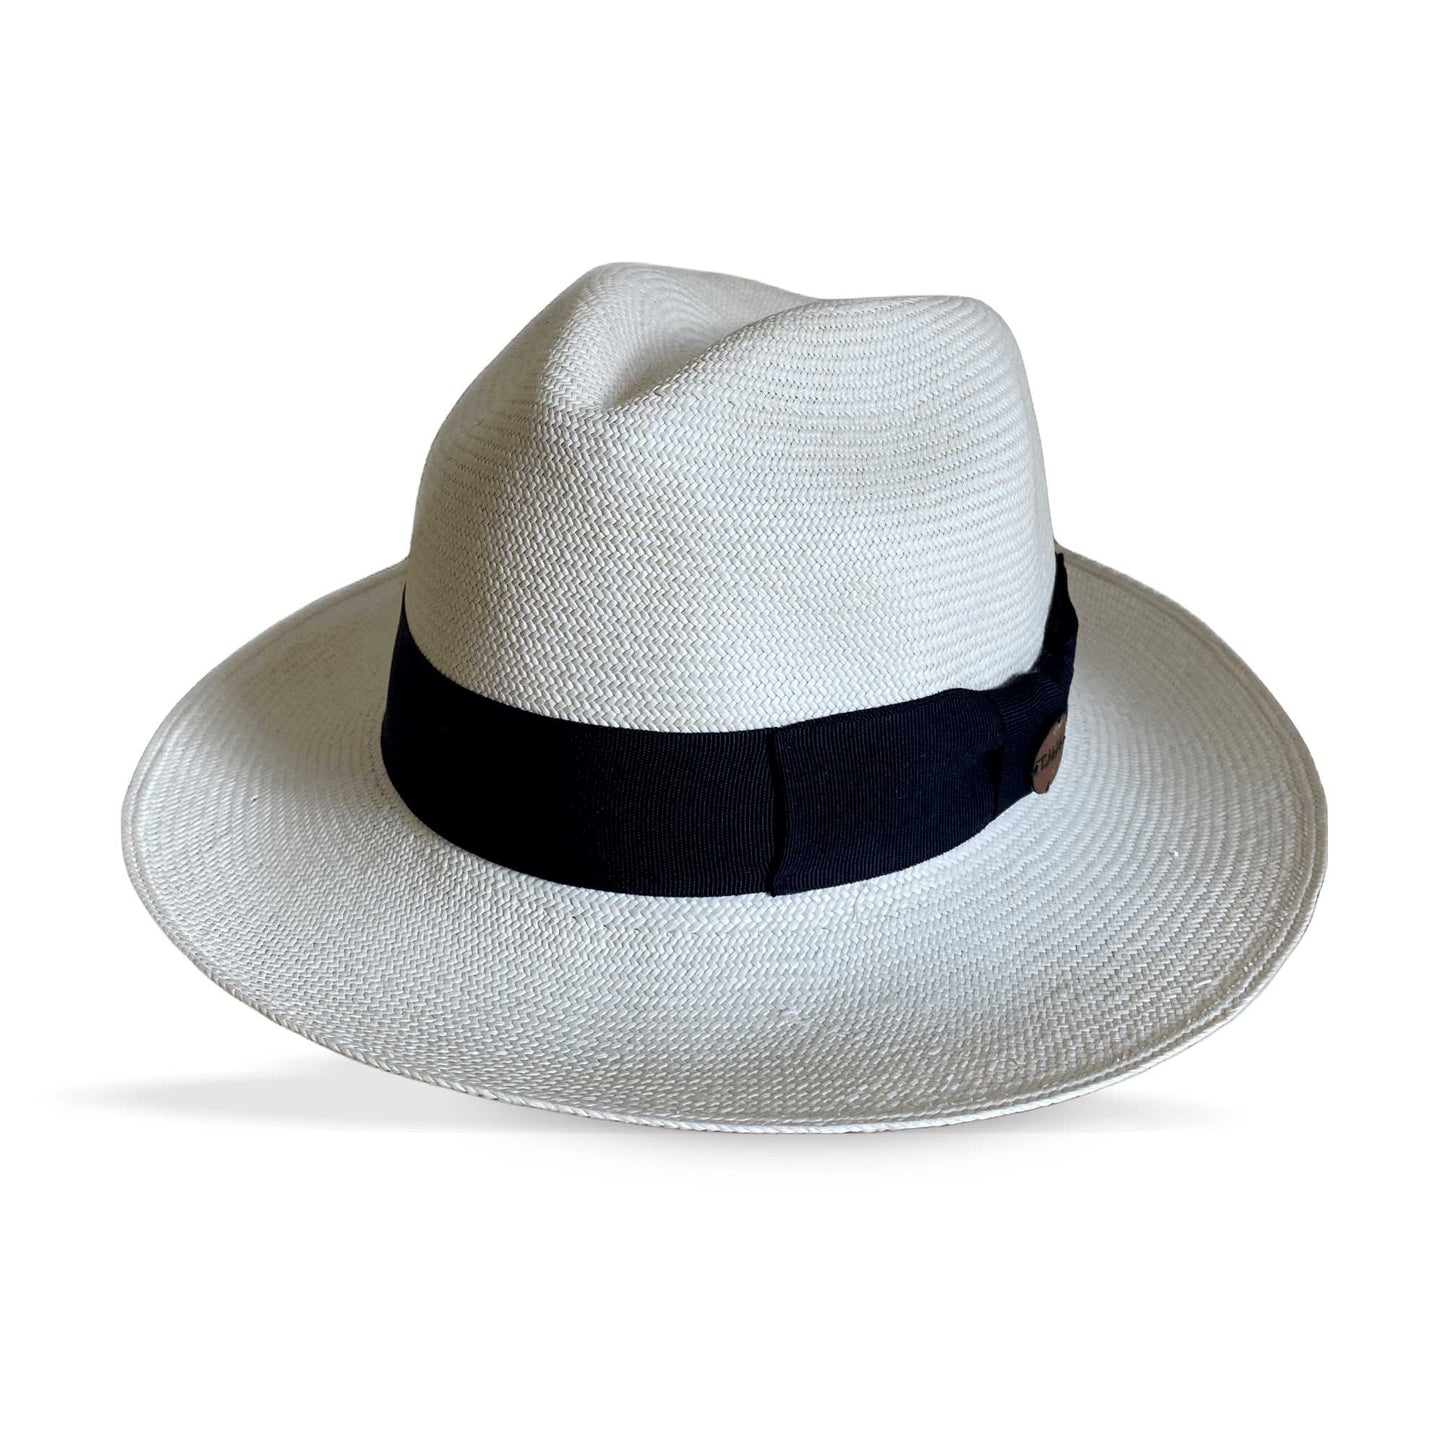 CLASSIC FEDORA STRAW HATS The Hip Hat